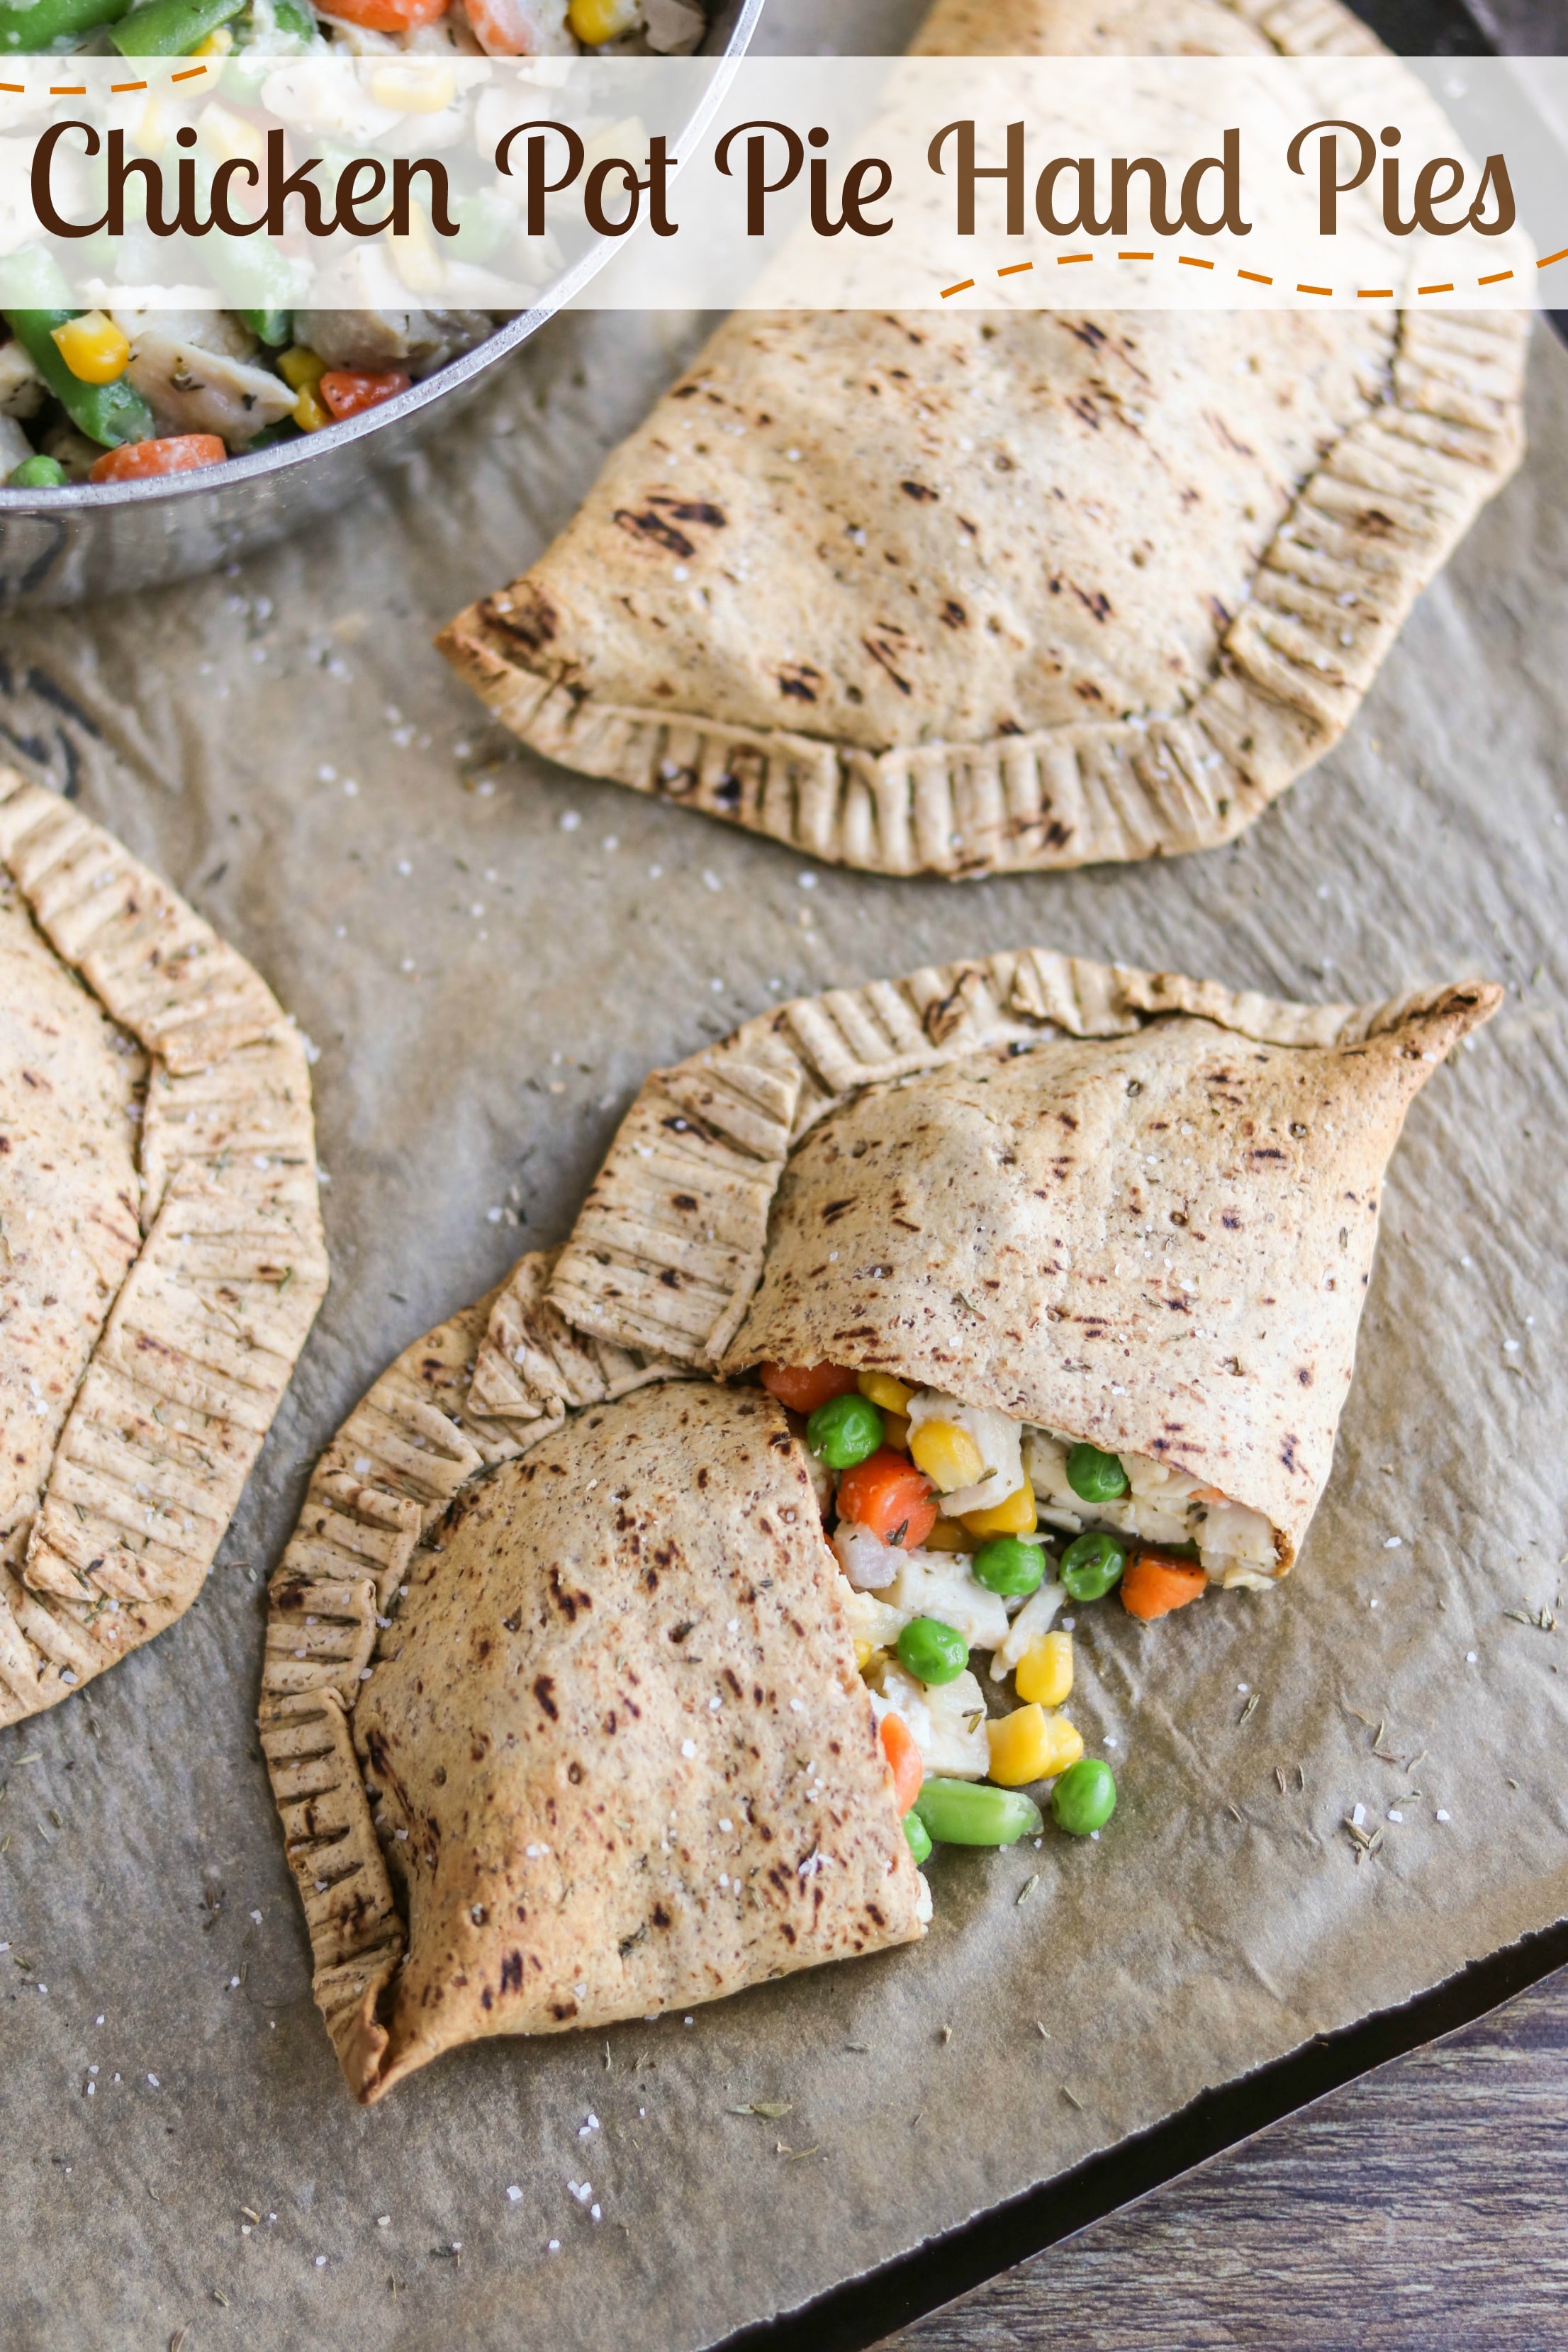 Freezable make-ahead! Perfect grab-and-go meal for busy nights! Our Easy Chicken Pot Pie Hand Pies have all the comforting, homestyle goodness of traditional chicken pot pies, but are more nutritious and totally portable. Filled with yummy (kid-friendly) veggies and chunks of tender white-meat chicken, plus a creamy (but not too messy!) sauce. All wrapped in a healthier, thyme-seasoned pot pie crust. Stock your freezer with healthy homemade "Hot Pockets"! {ad} | www.TwoHealthyKitchens.com